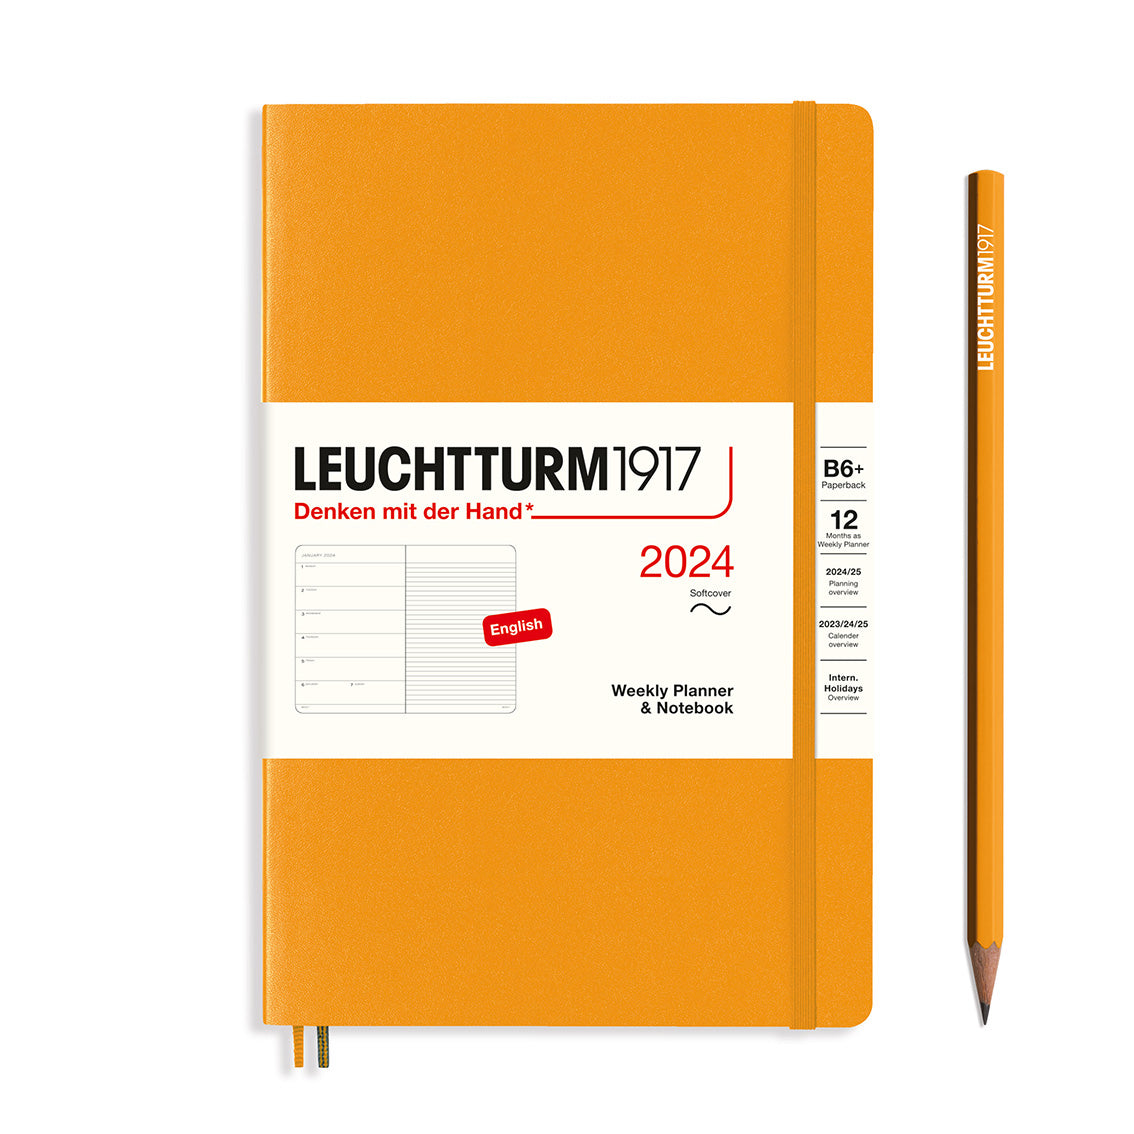 An image of an orange planner with an orange elastic band holding it together and a cream paper wrap around the middle stating the business name Leuchtturm1917, that it is for the year 2024, it is a weekly planner and notebook, is B6+ in size and an English language version. It has an image on the wrap showing the inside layout which is a week on the left hand page and a notes page on thr right hand page. An orange pencil is shown at the side of the planner.